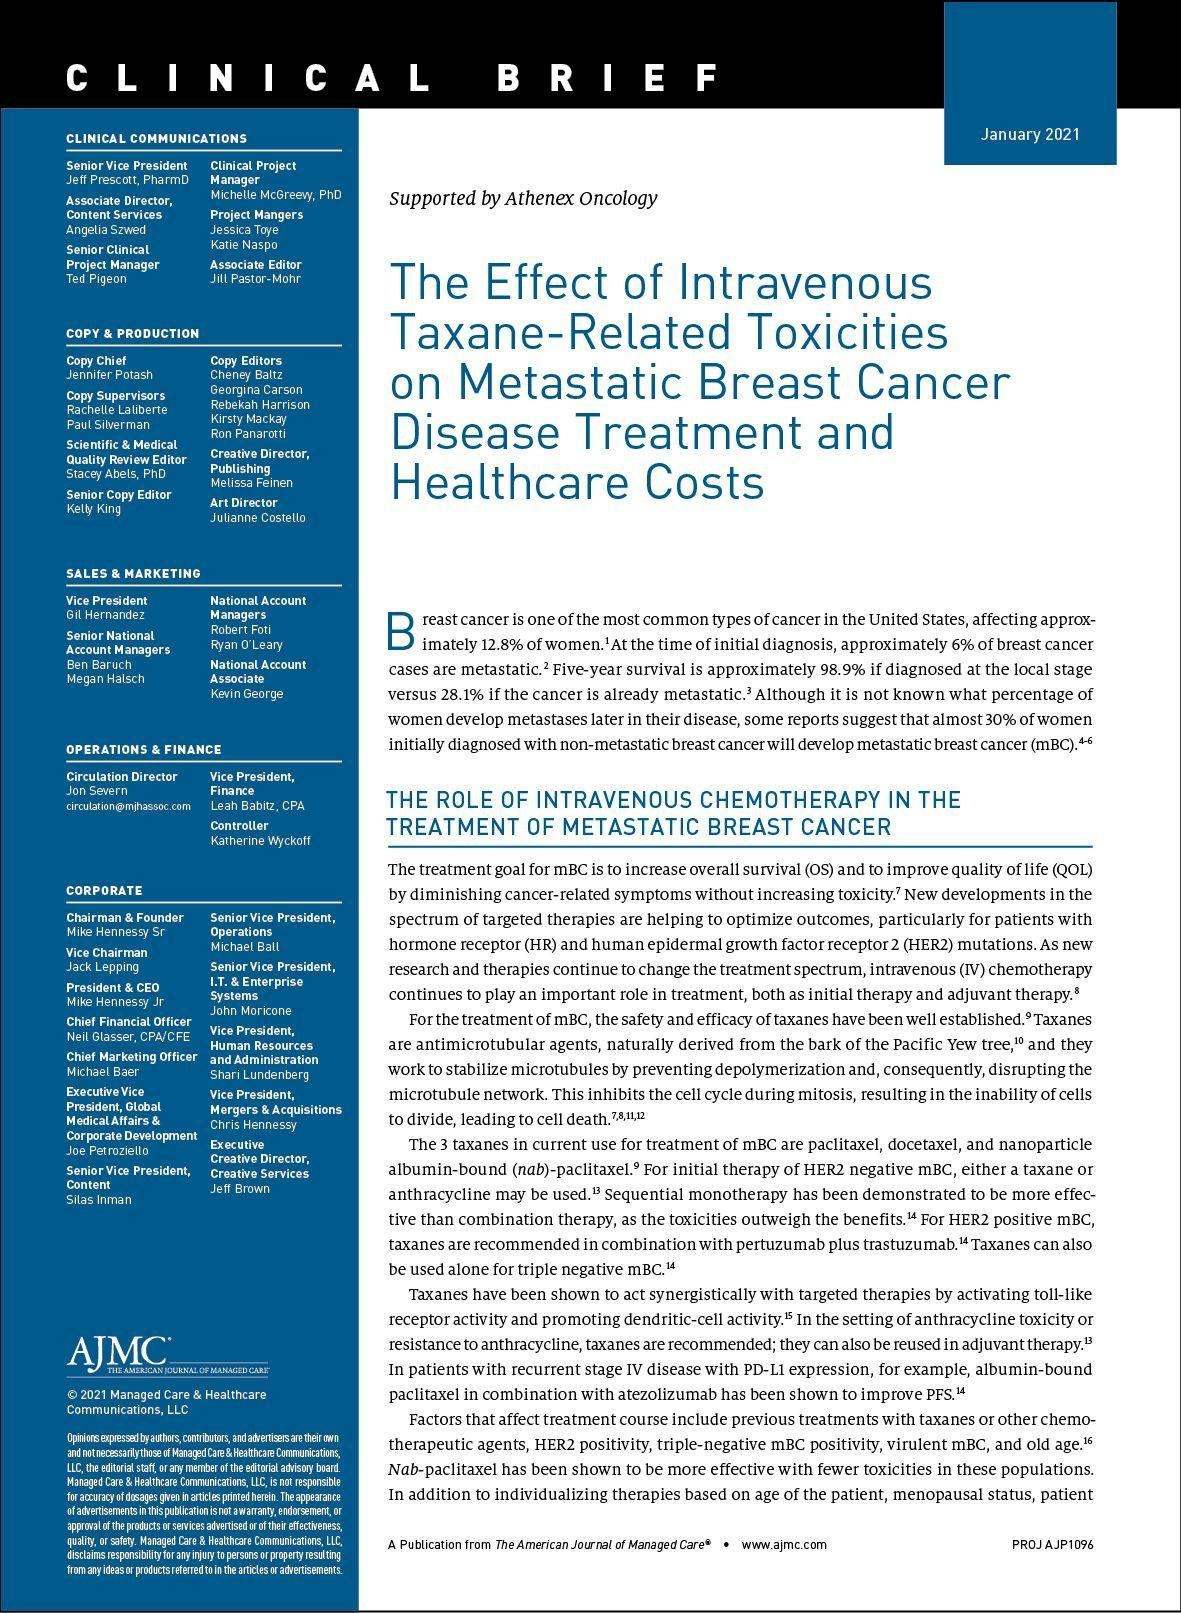 The Effect of Intravenous Taxane-Related Toxicities on Metastatic Breast Cancer Disease Treatment and Healthcare Costs